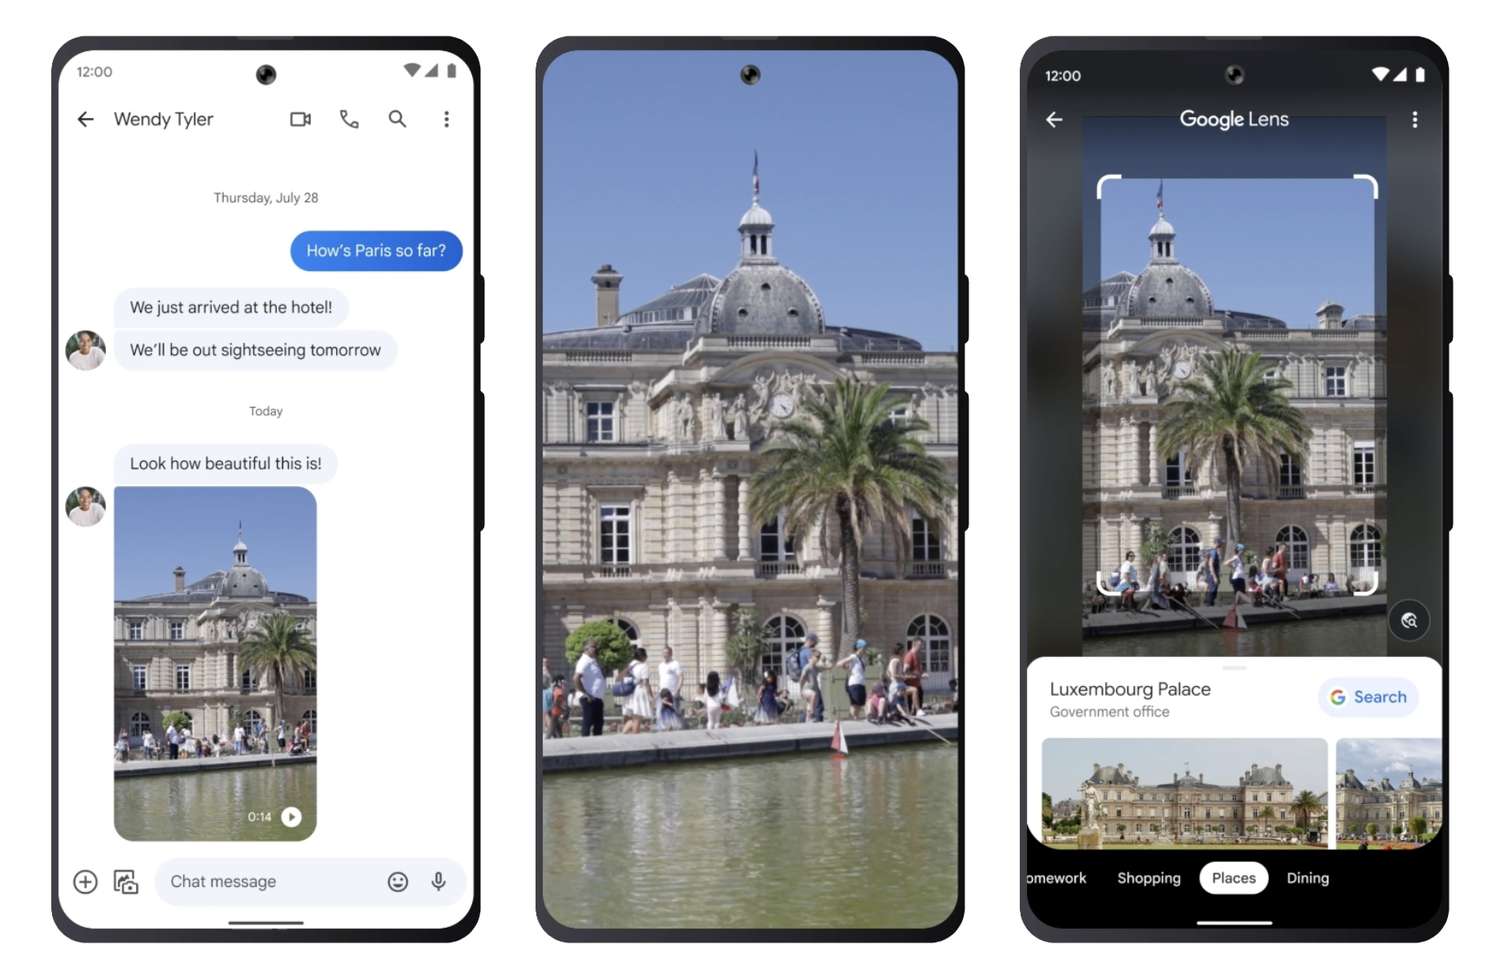 Using Google Lens multisearch during travel